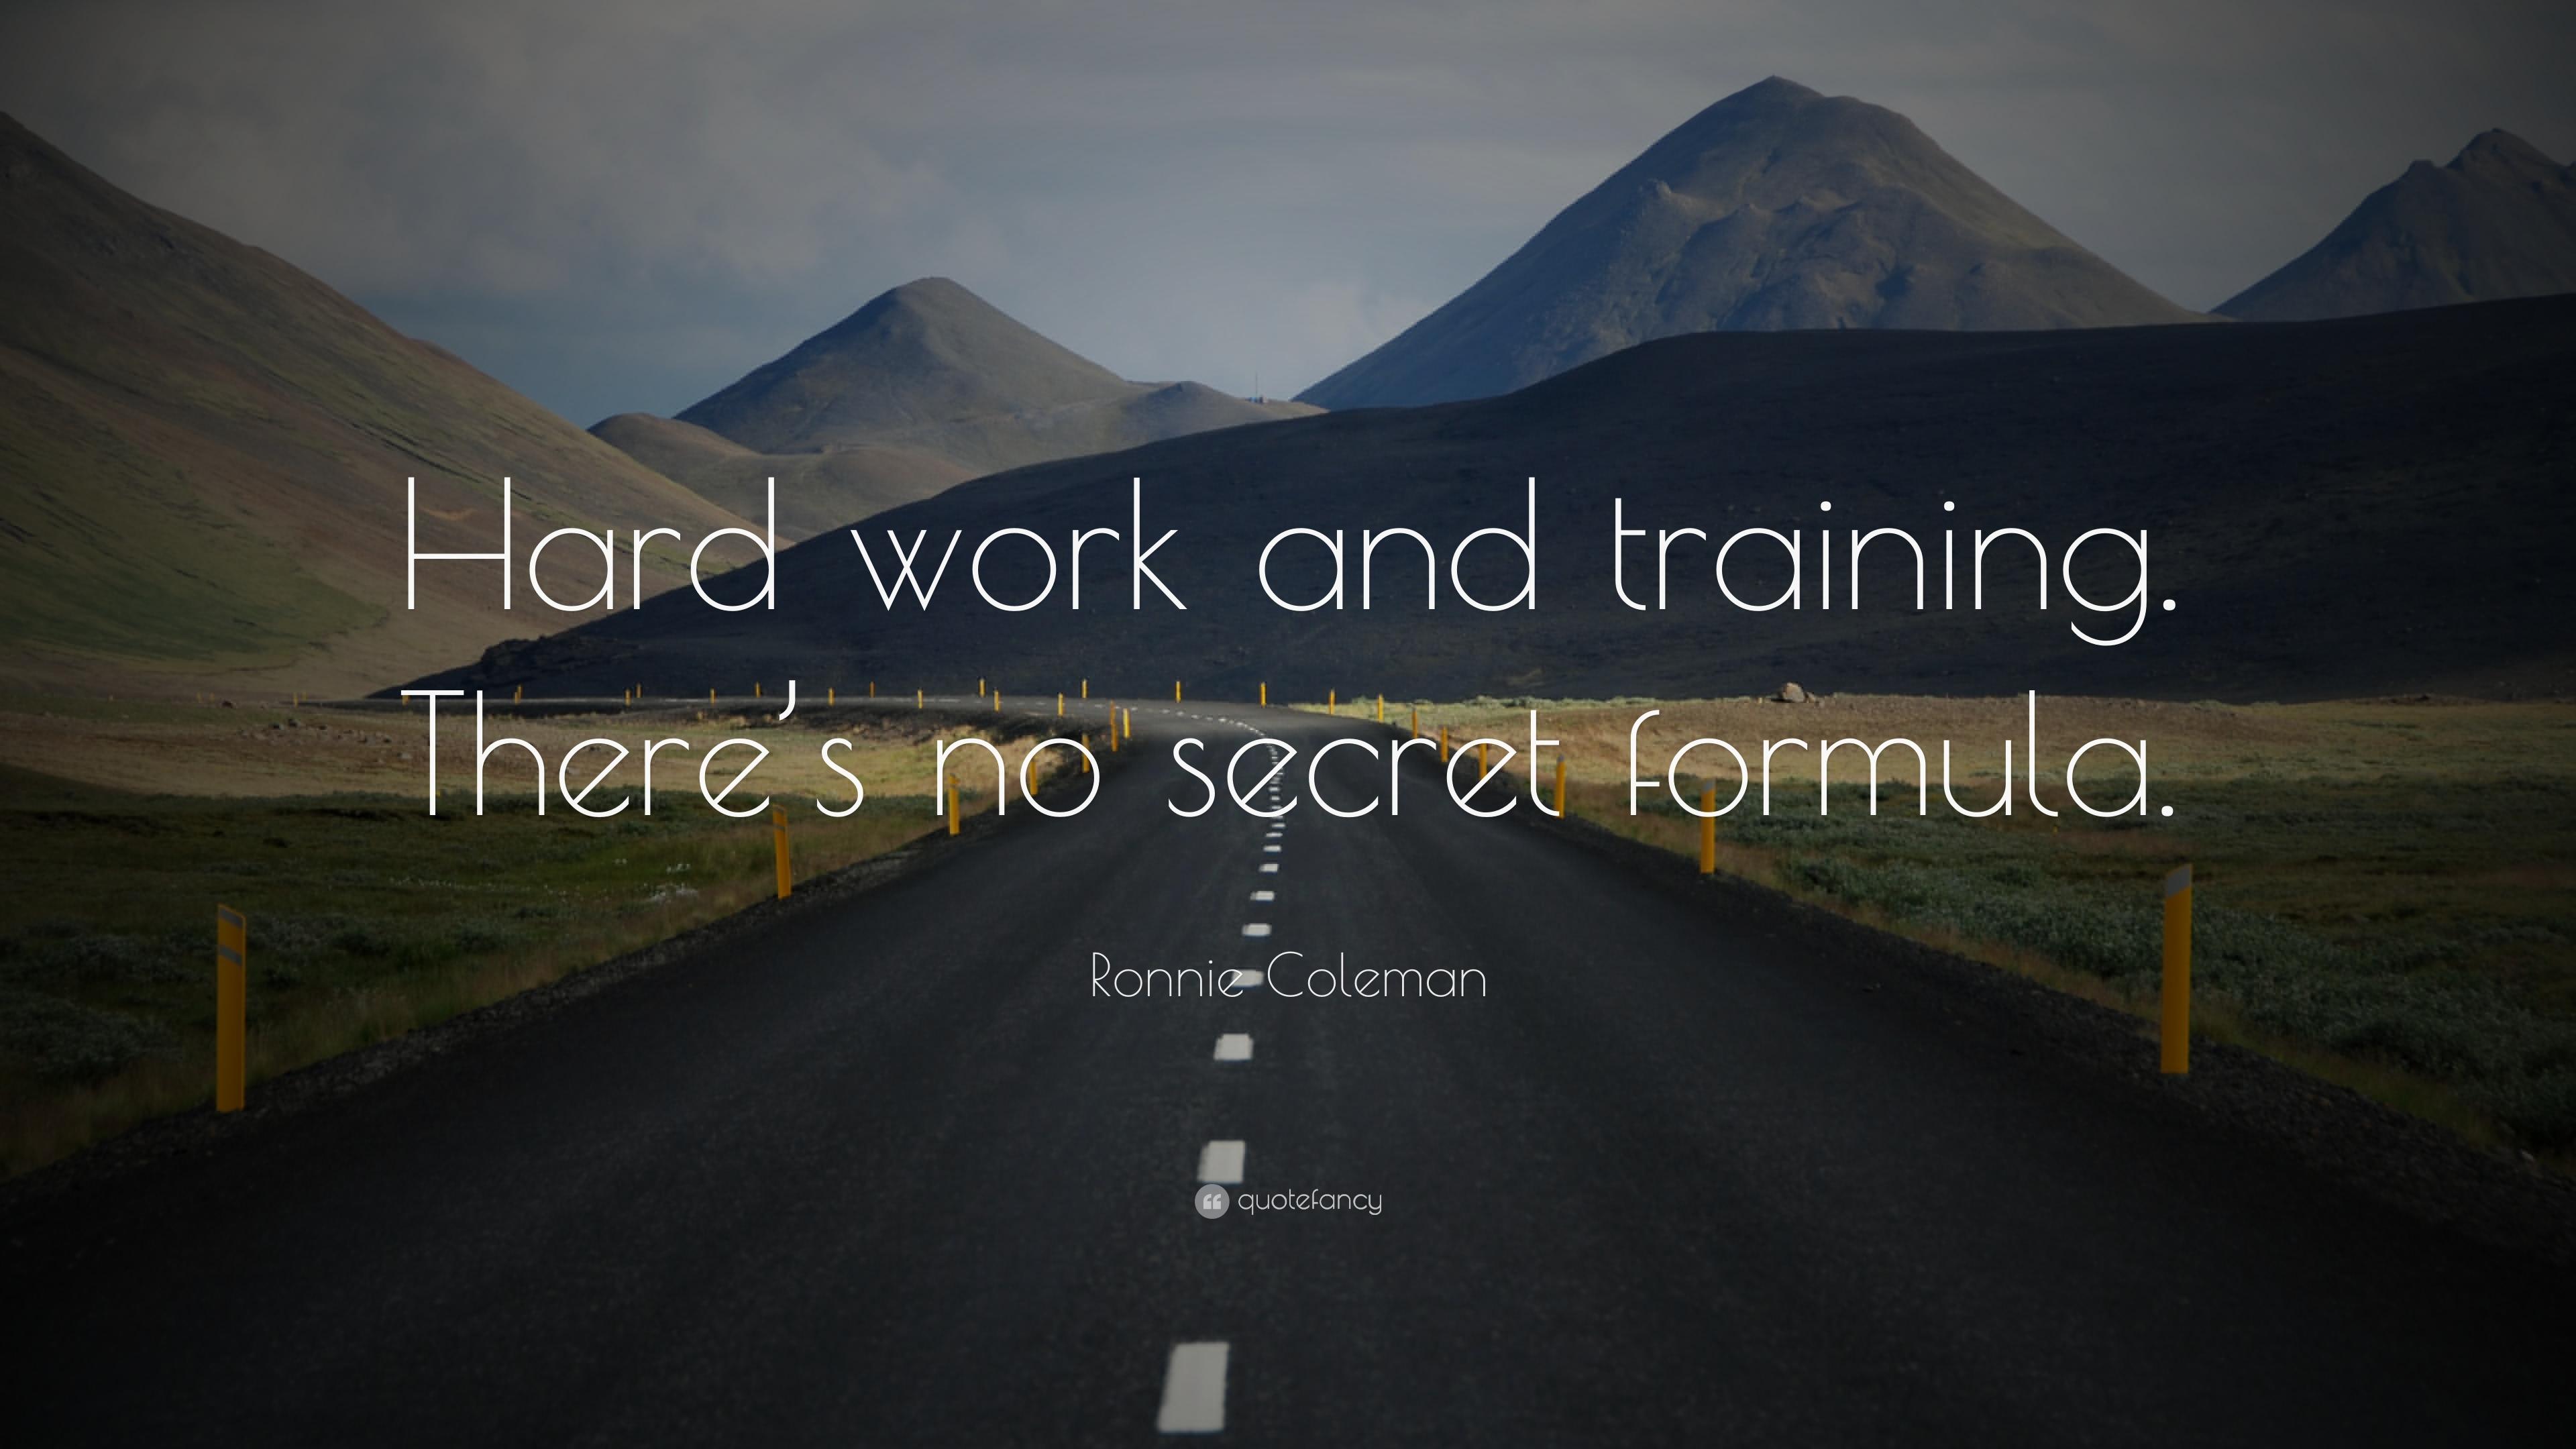 Ronnie Coleman Quote: “Hard work and training. There's no secret